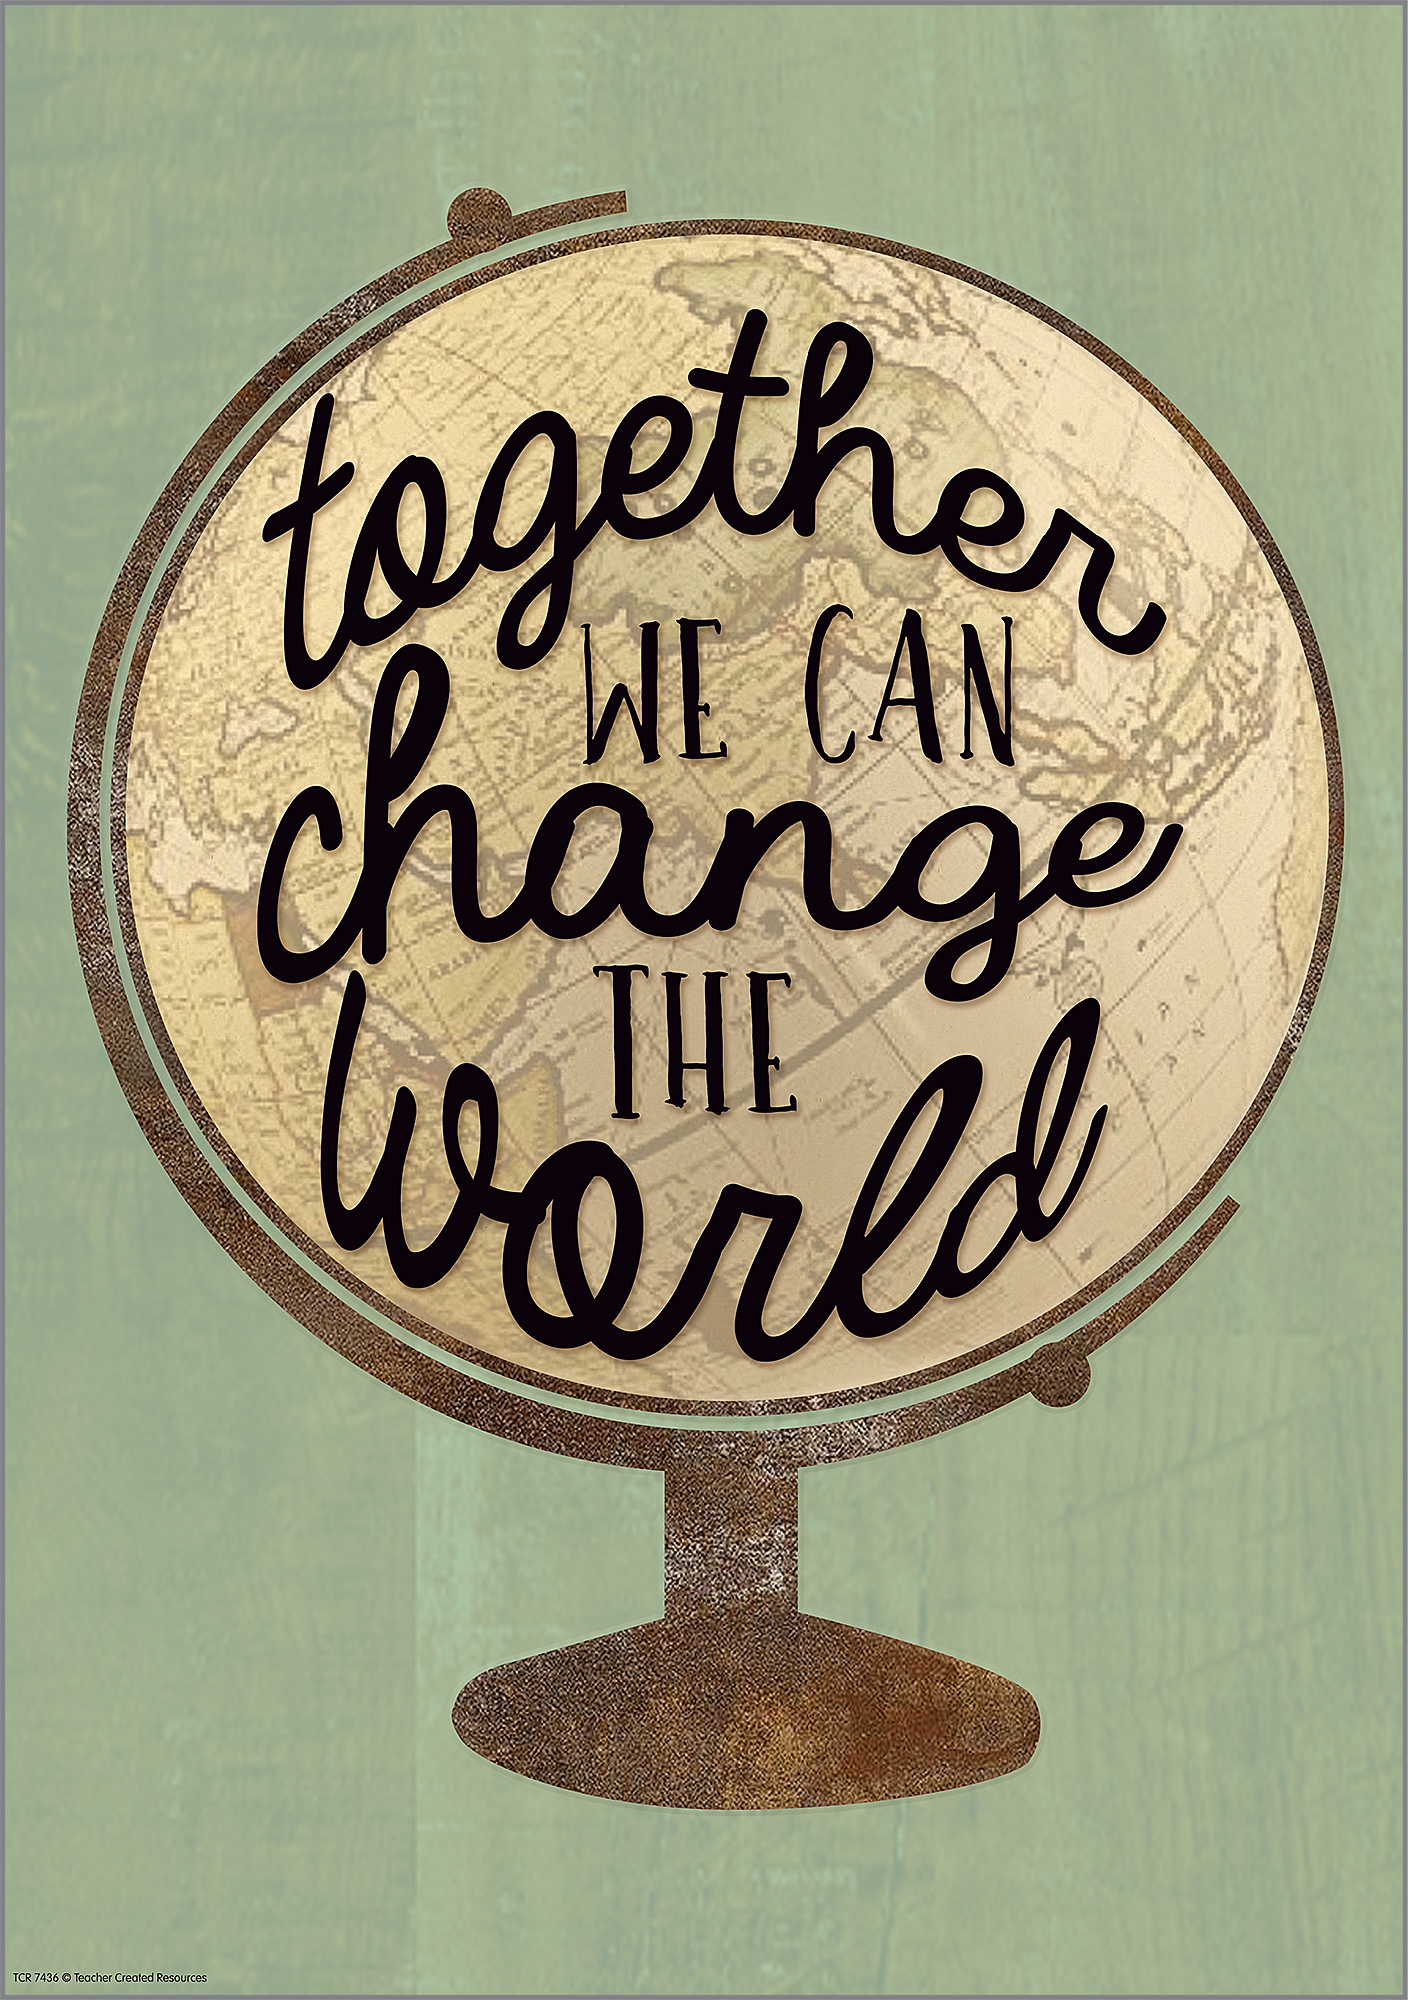 together we can change the world essay 150 words